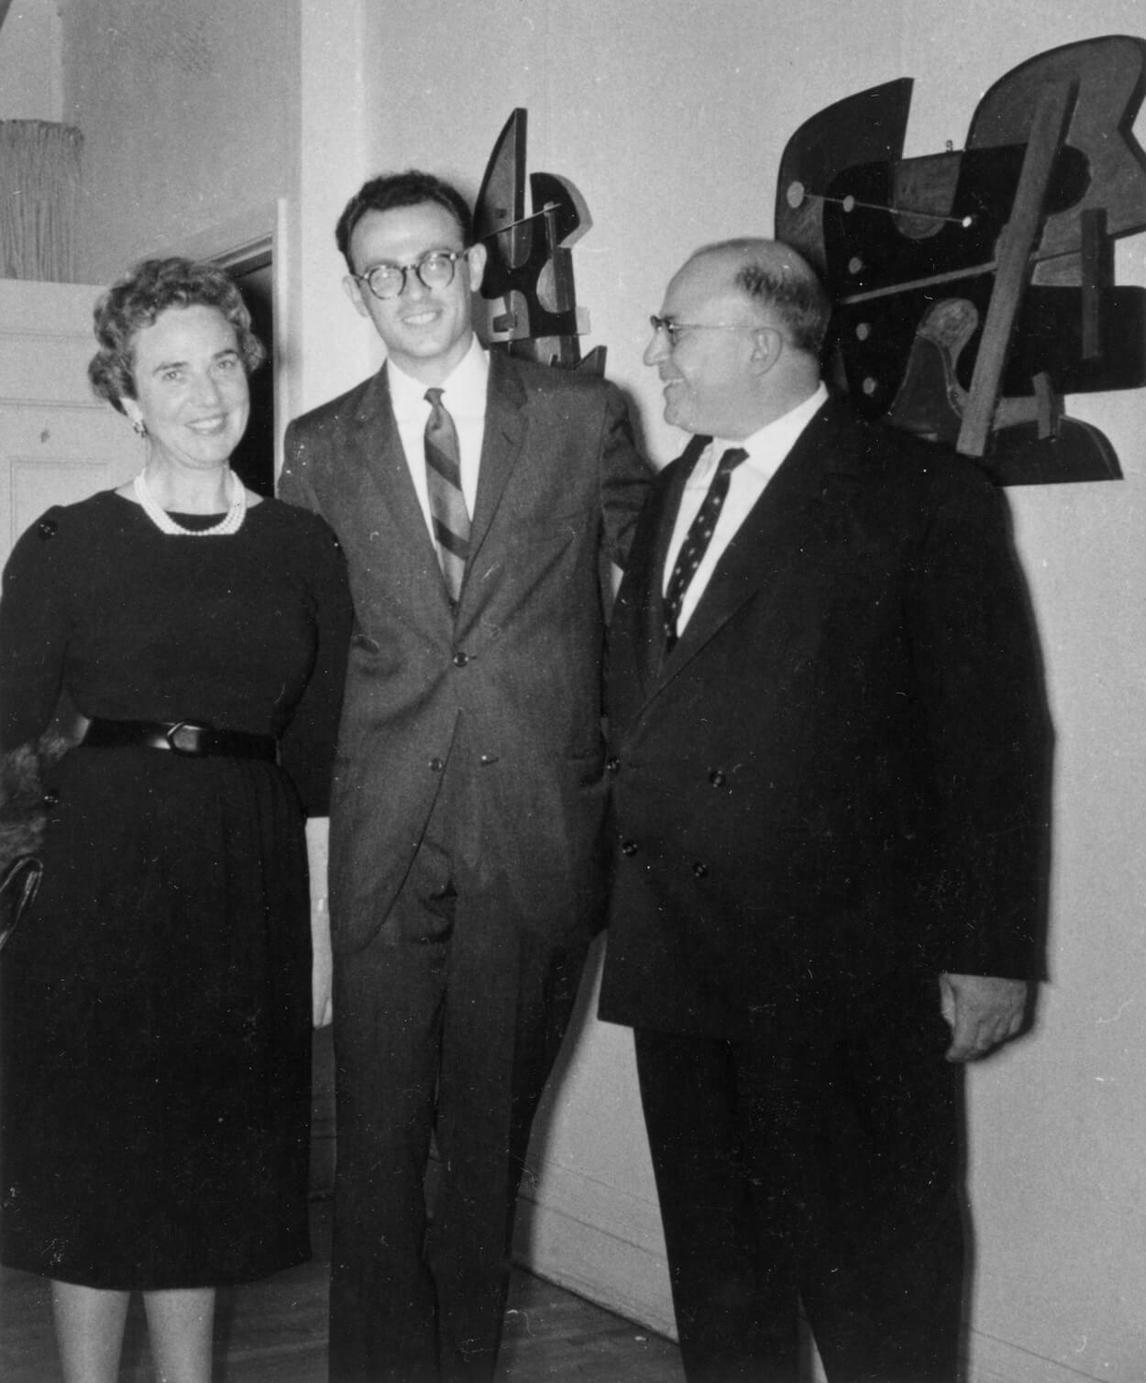 Sorel with Ayala and Samuel J. Zacks at Etrog’s first Canadian one-man show at Gallery Moos, Toronto, 1959